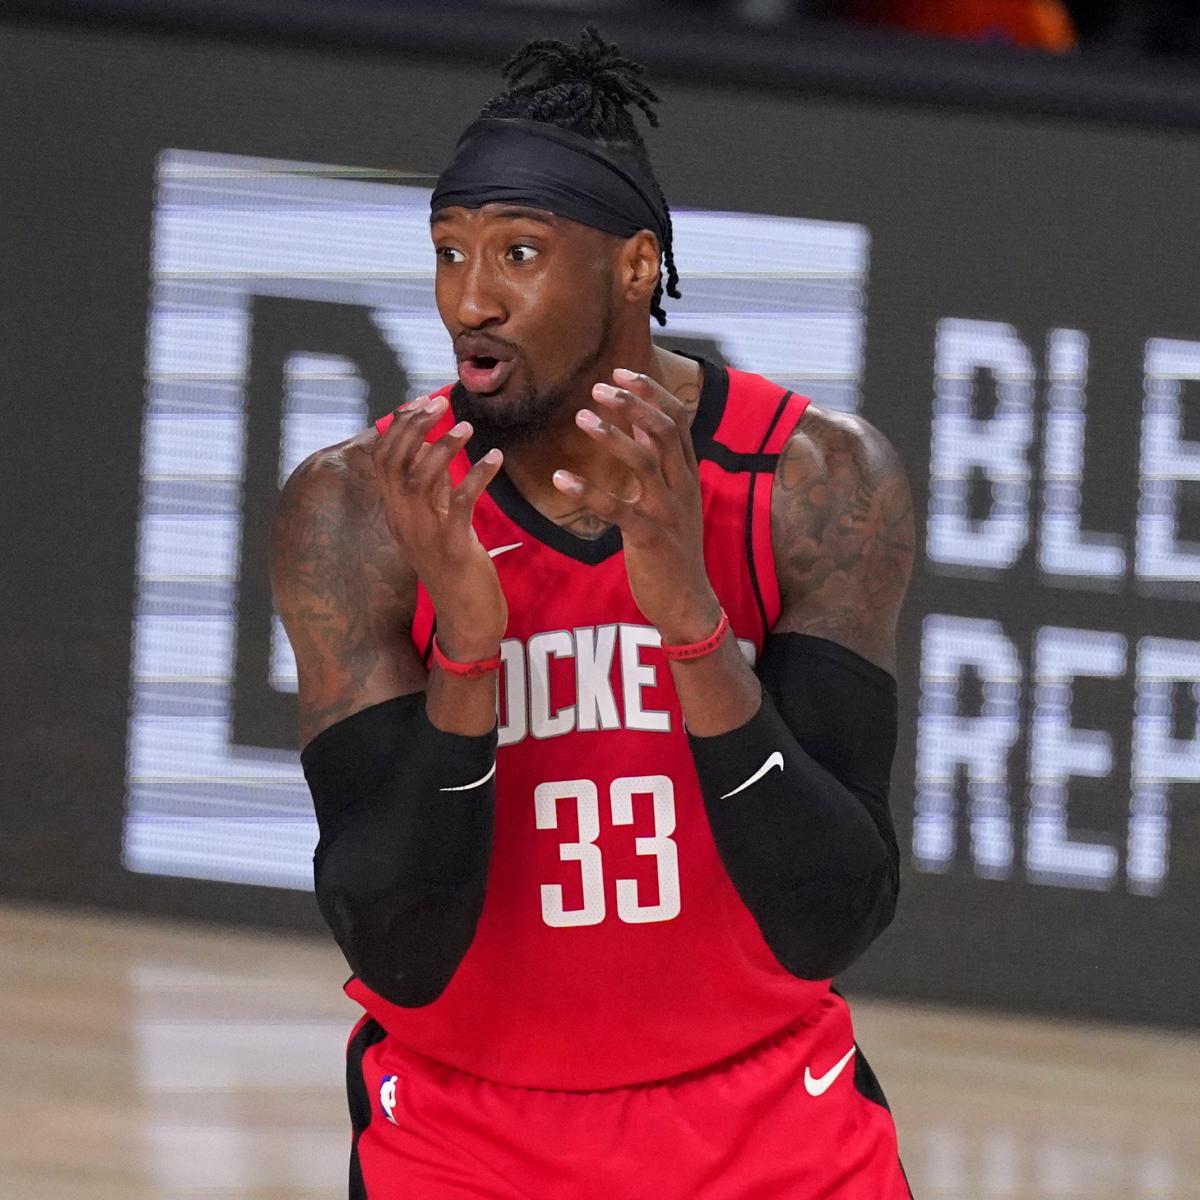 Rockets' Robert Covington: This thing is unpredictable